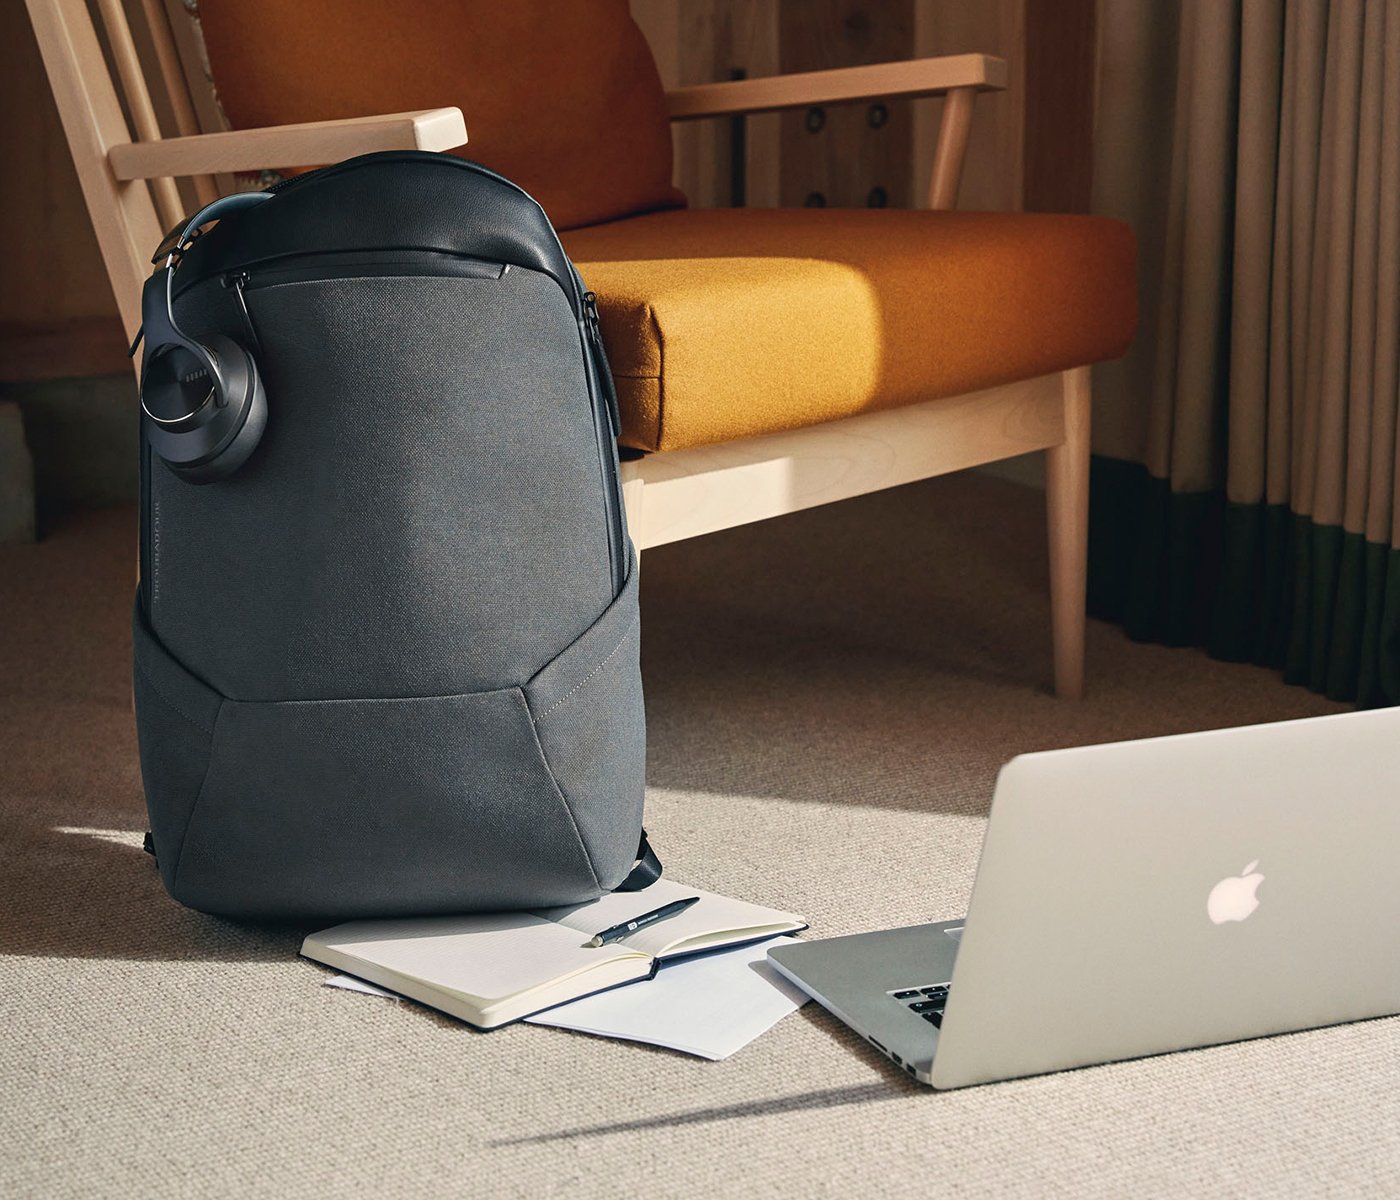 How to find the ideal bag for your laptop